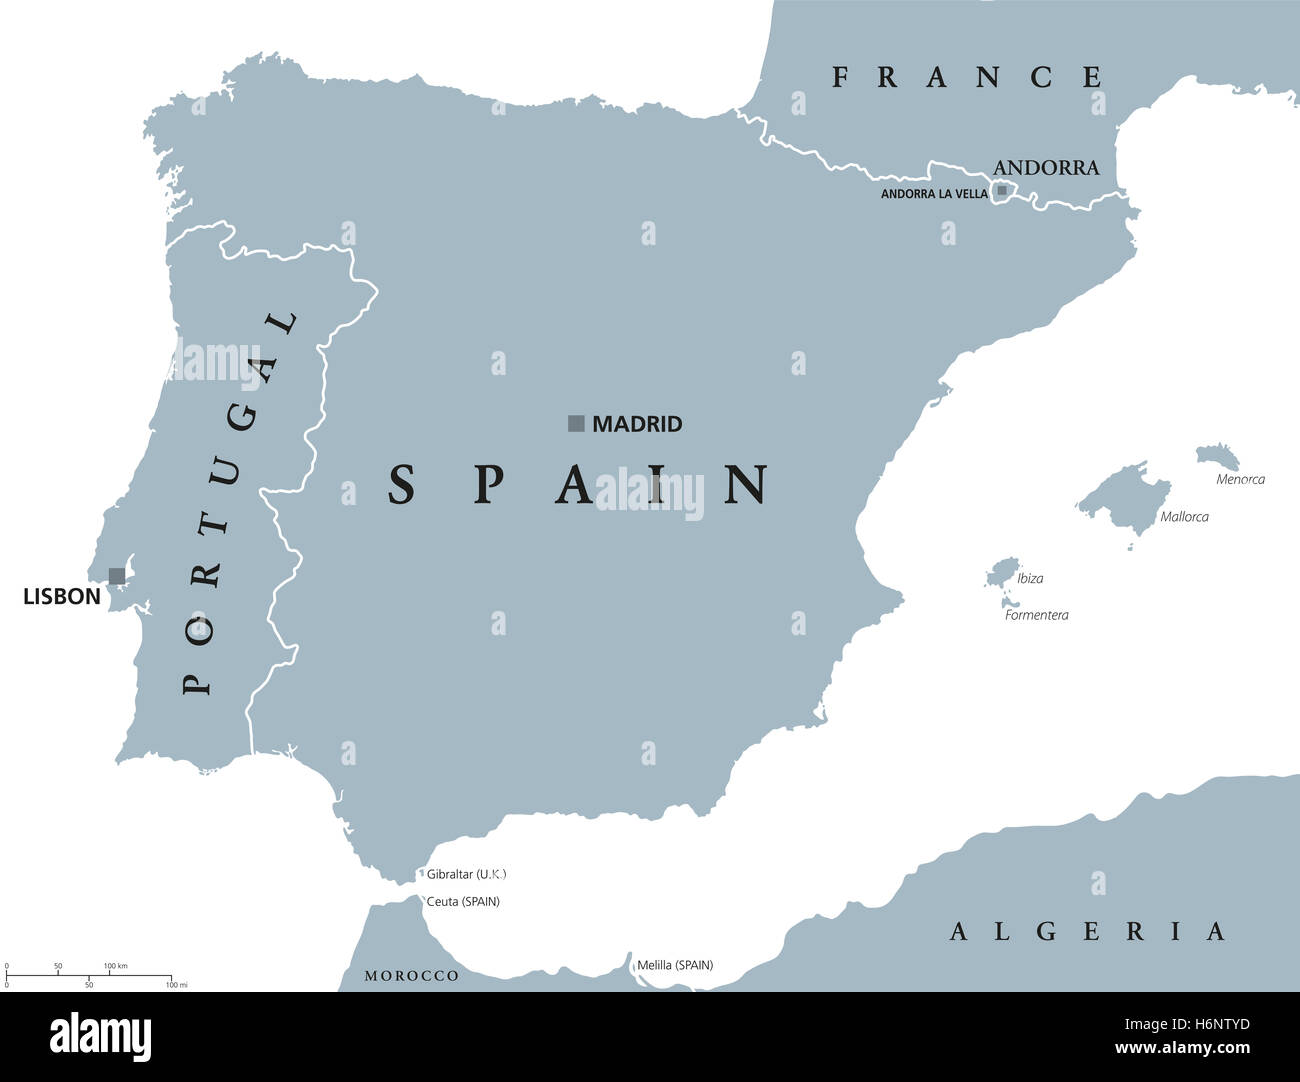 Portugal and Spain political map with capitals Lisbon and Madrid, Balearic Islands and national borders. Gray illustration. Stock Photo